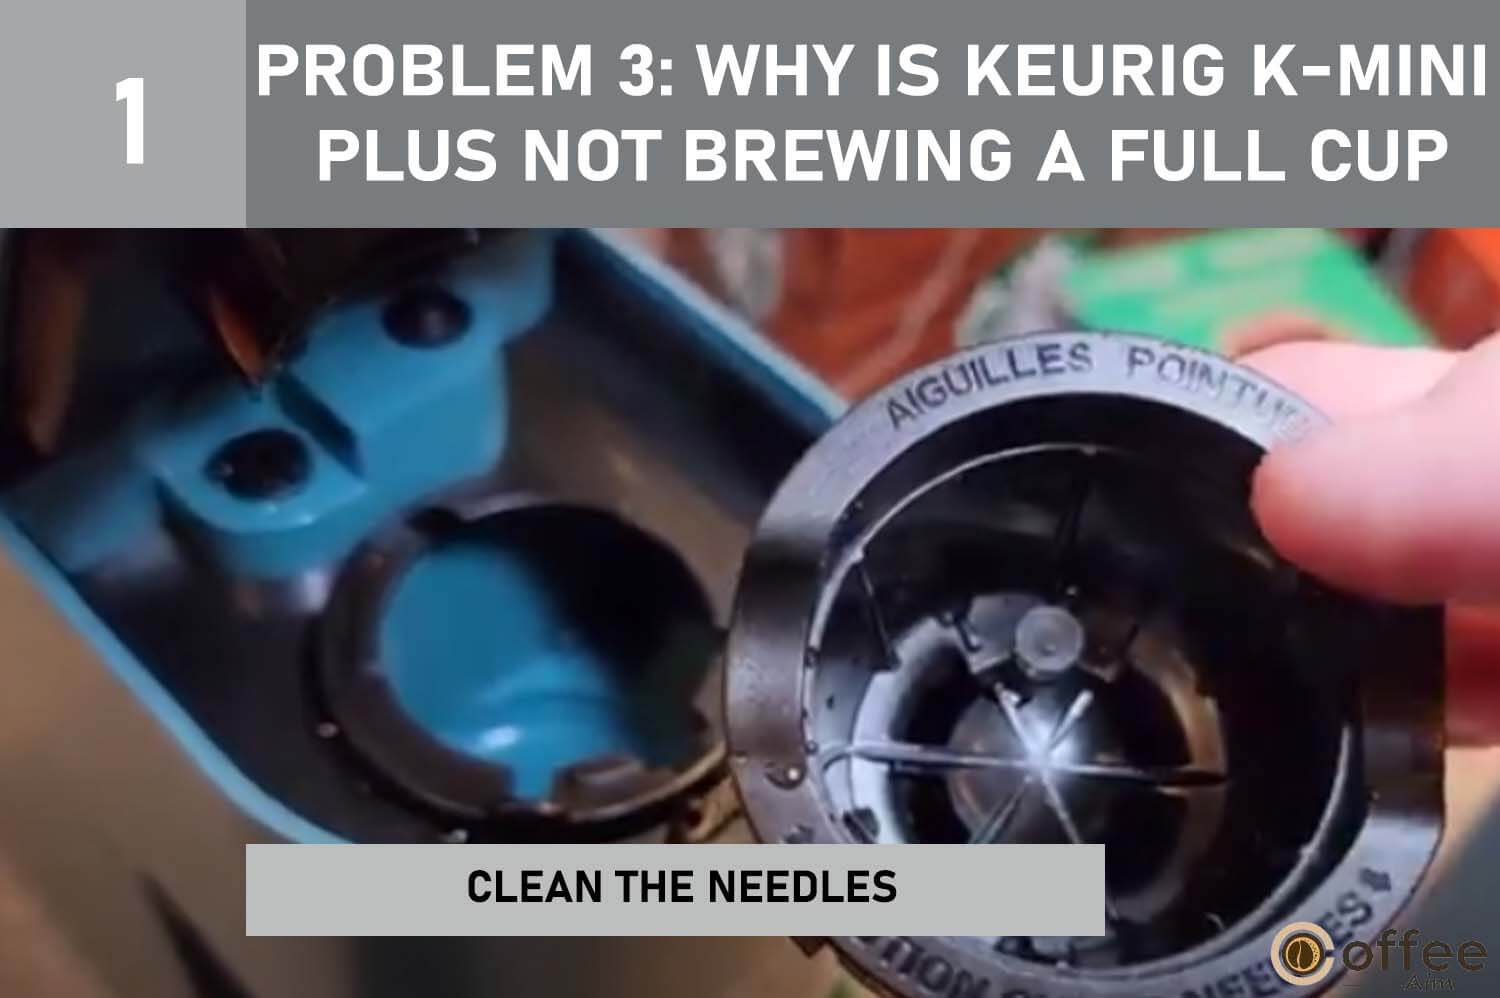 This image demonstrates the "Clean the Needles" step for addressing Problem 3: "Why Is Keurig K-Mini Plus Not Brewing a Full Cup?" in our article titled "Keurig K-Mini Plus Problems."




